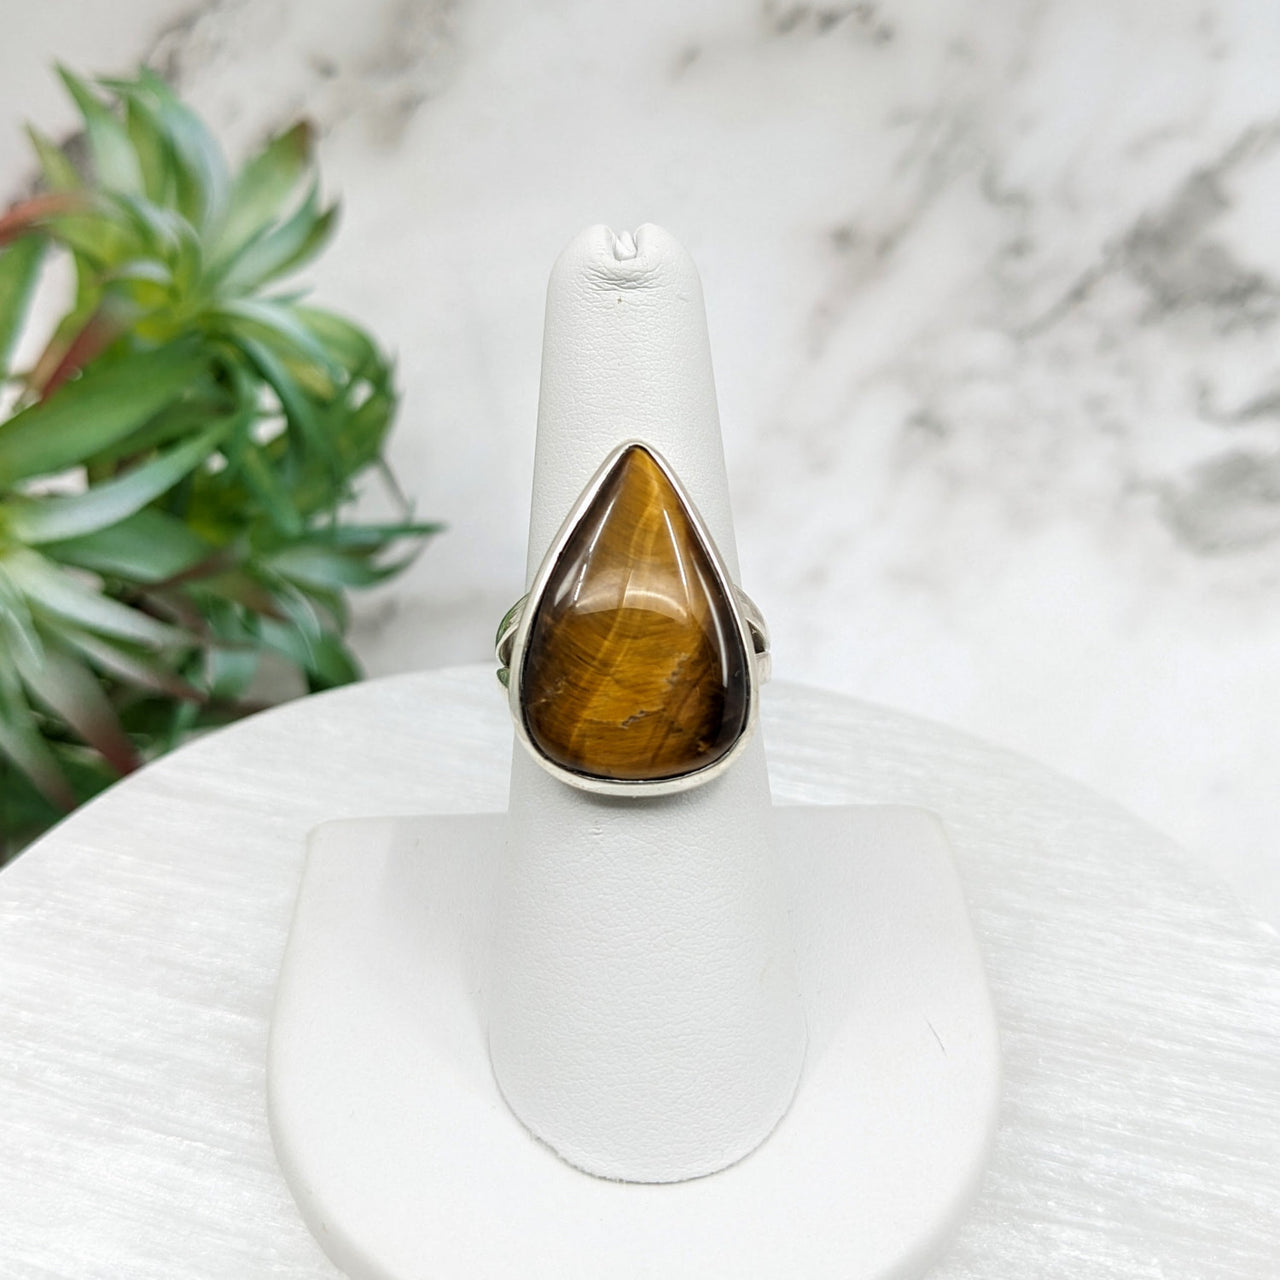 Tiger’s Eye Sz 7 Teardrop Ring LV5104 with yellow tiger eye stone on white stand